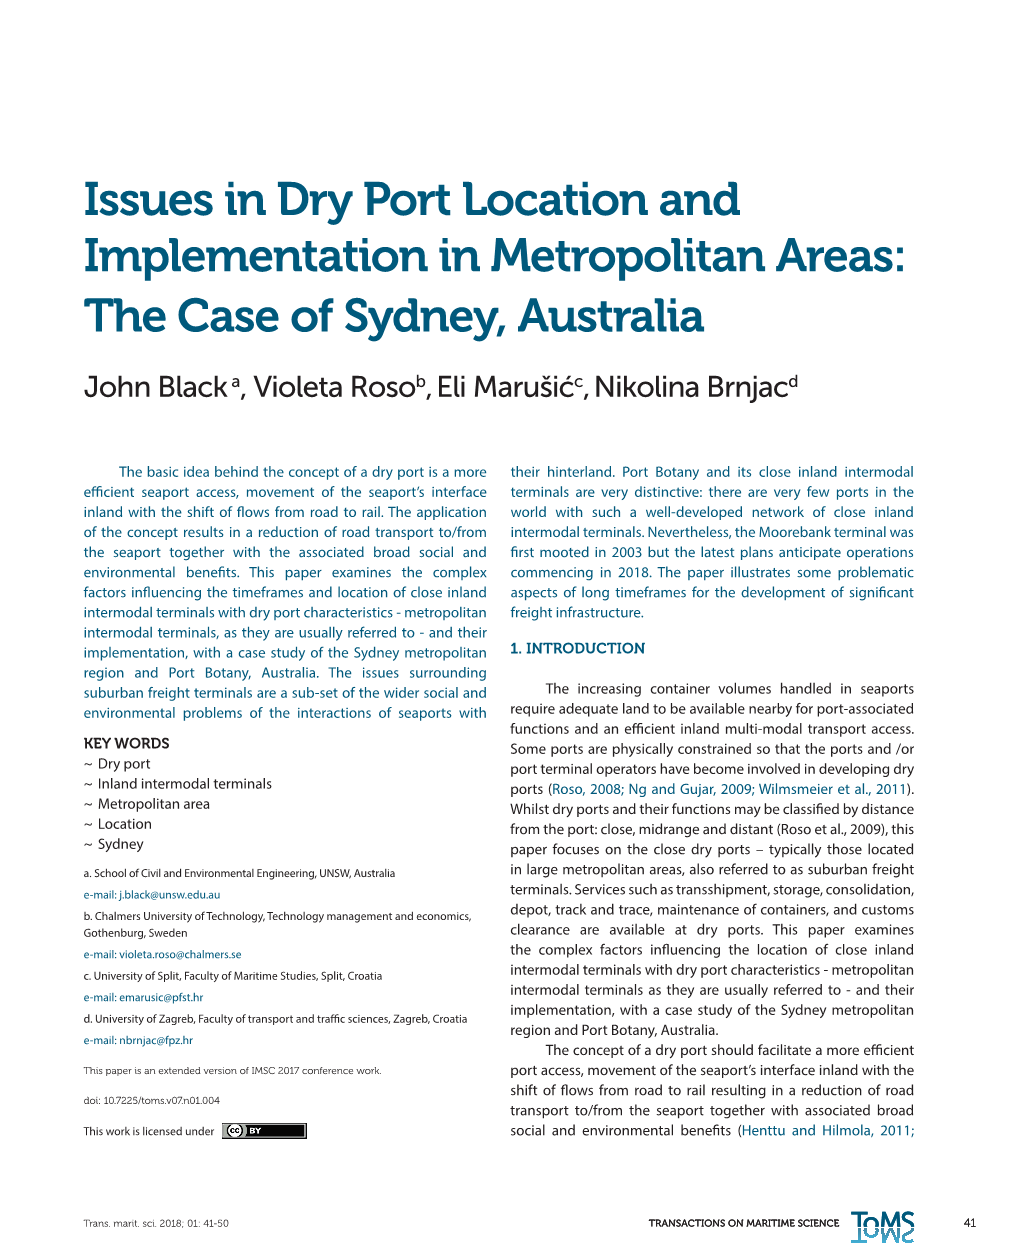 Issues in Dry Port Location and Implementation in Metropolitan Areas: the Case of Sydney, Australia